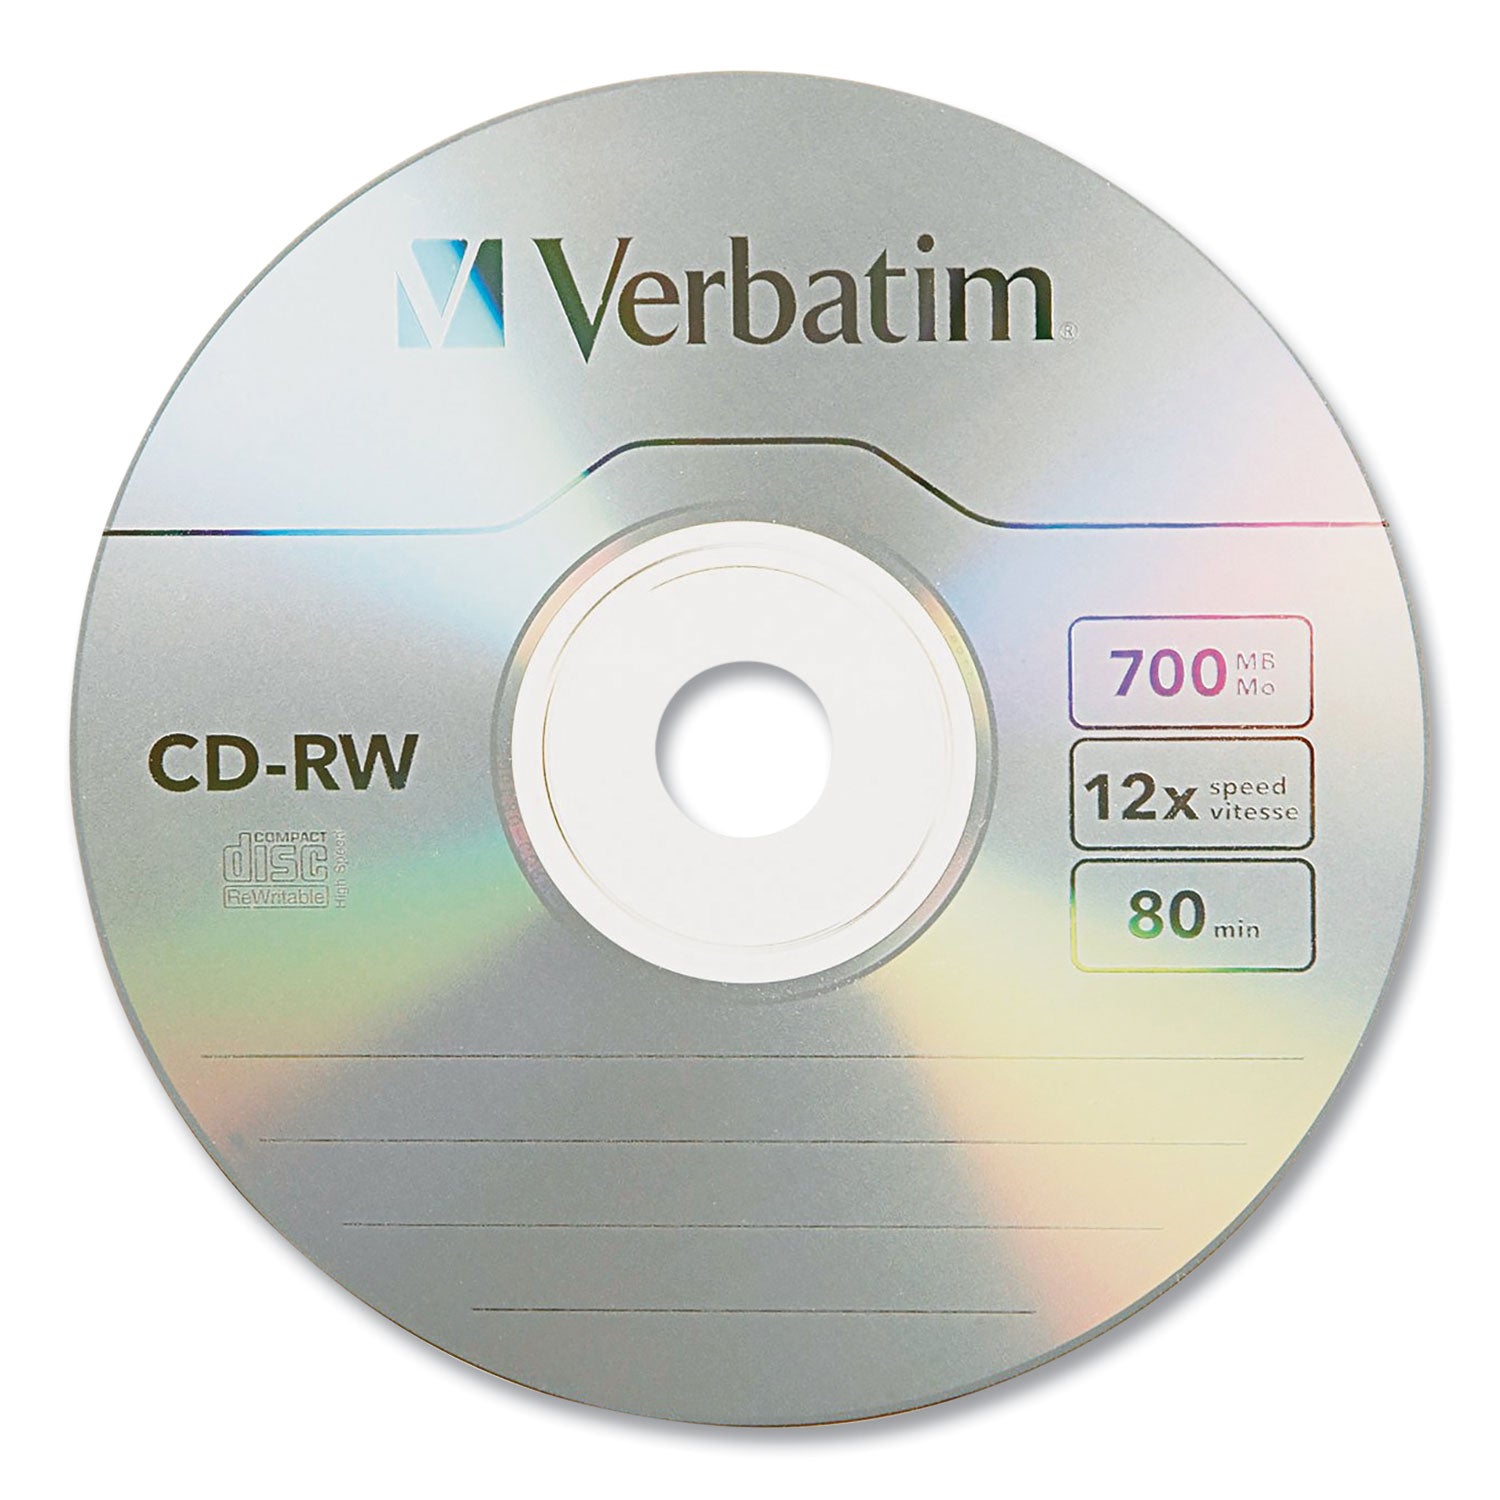 CD-RW Rewritable Disc, 700 MB/80 min, 12x, Spindle, Silver, 25/Pack - 